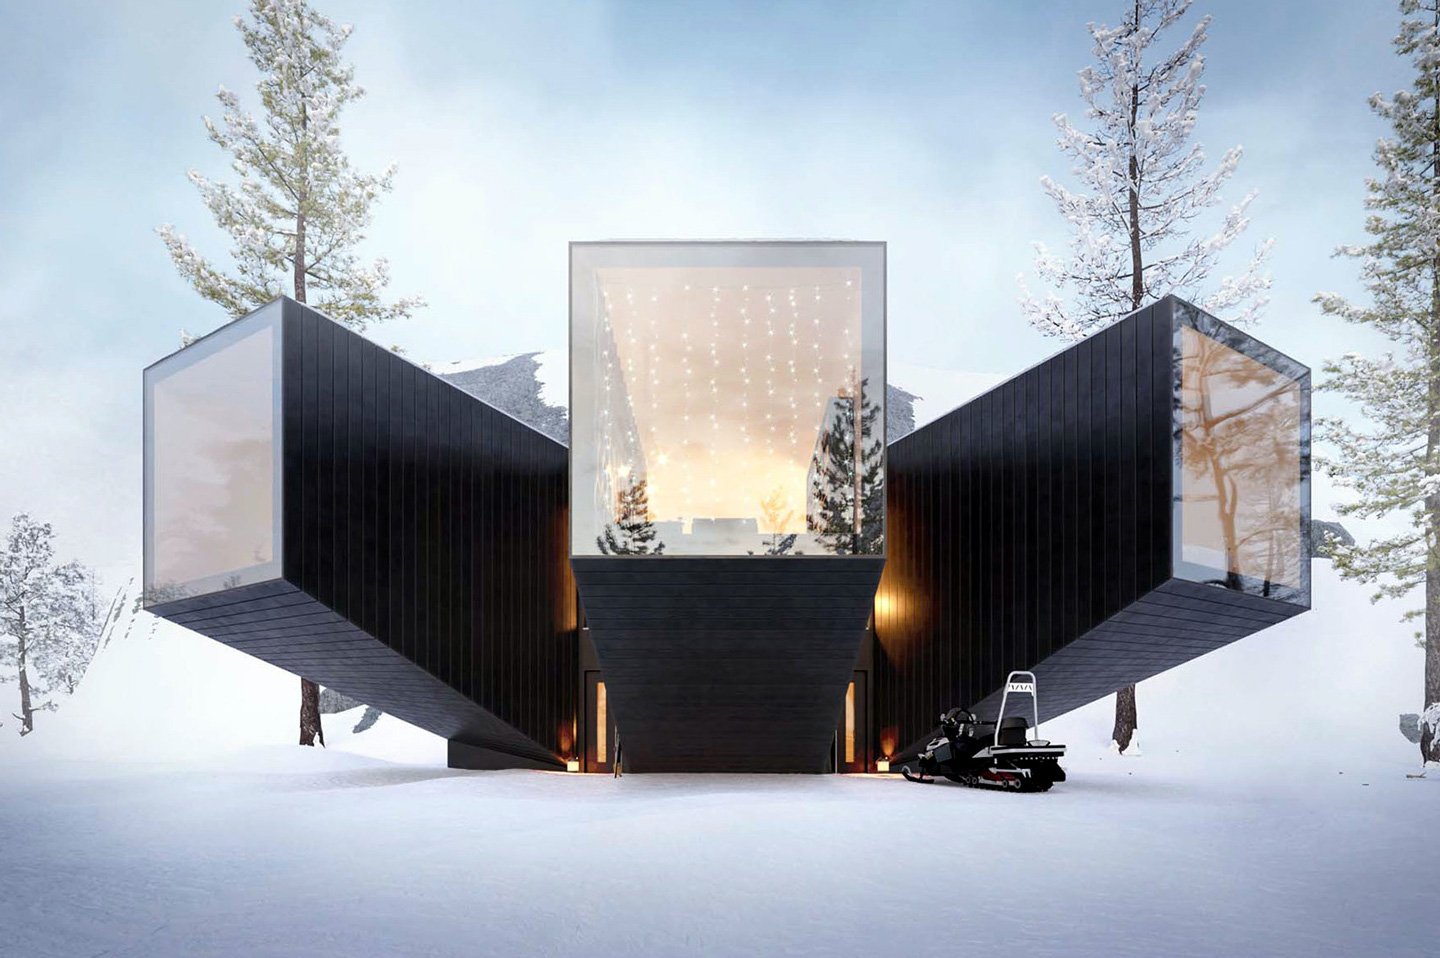 #This secluded alpine home comes with three distinct pod-shaped living spaces